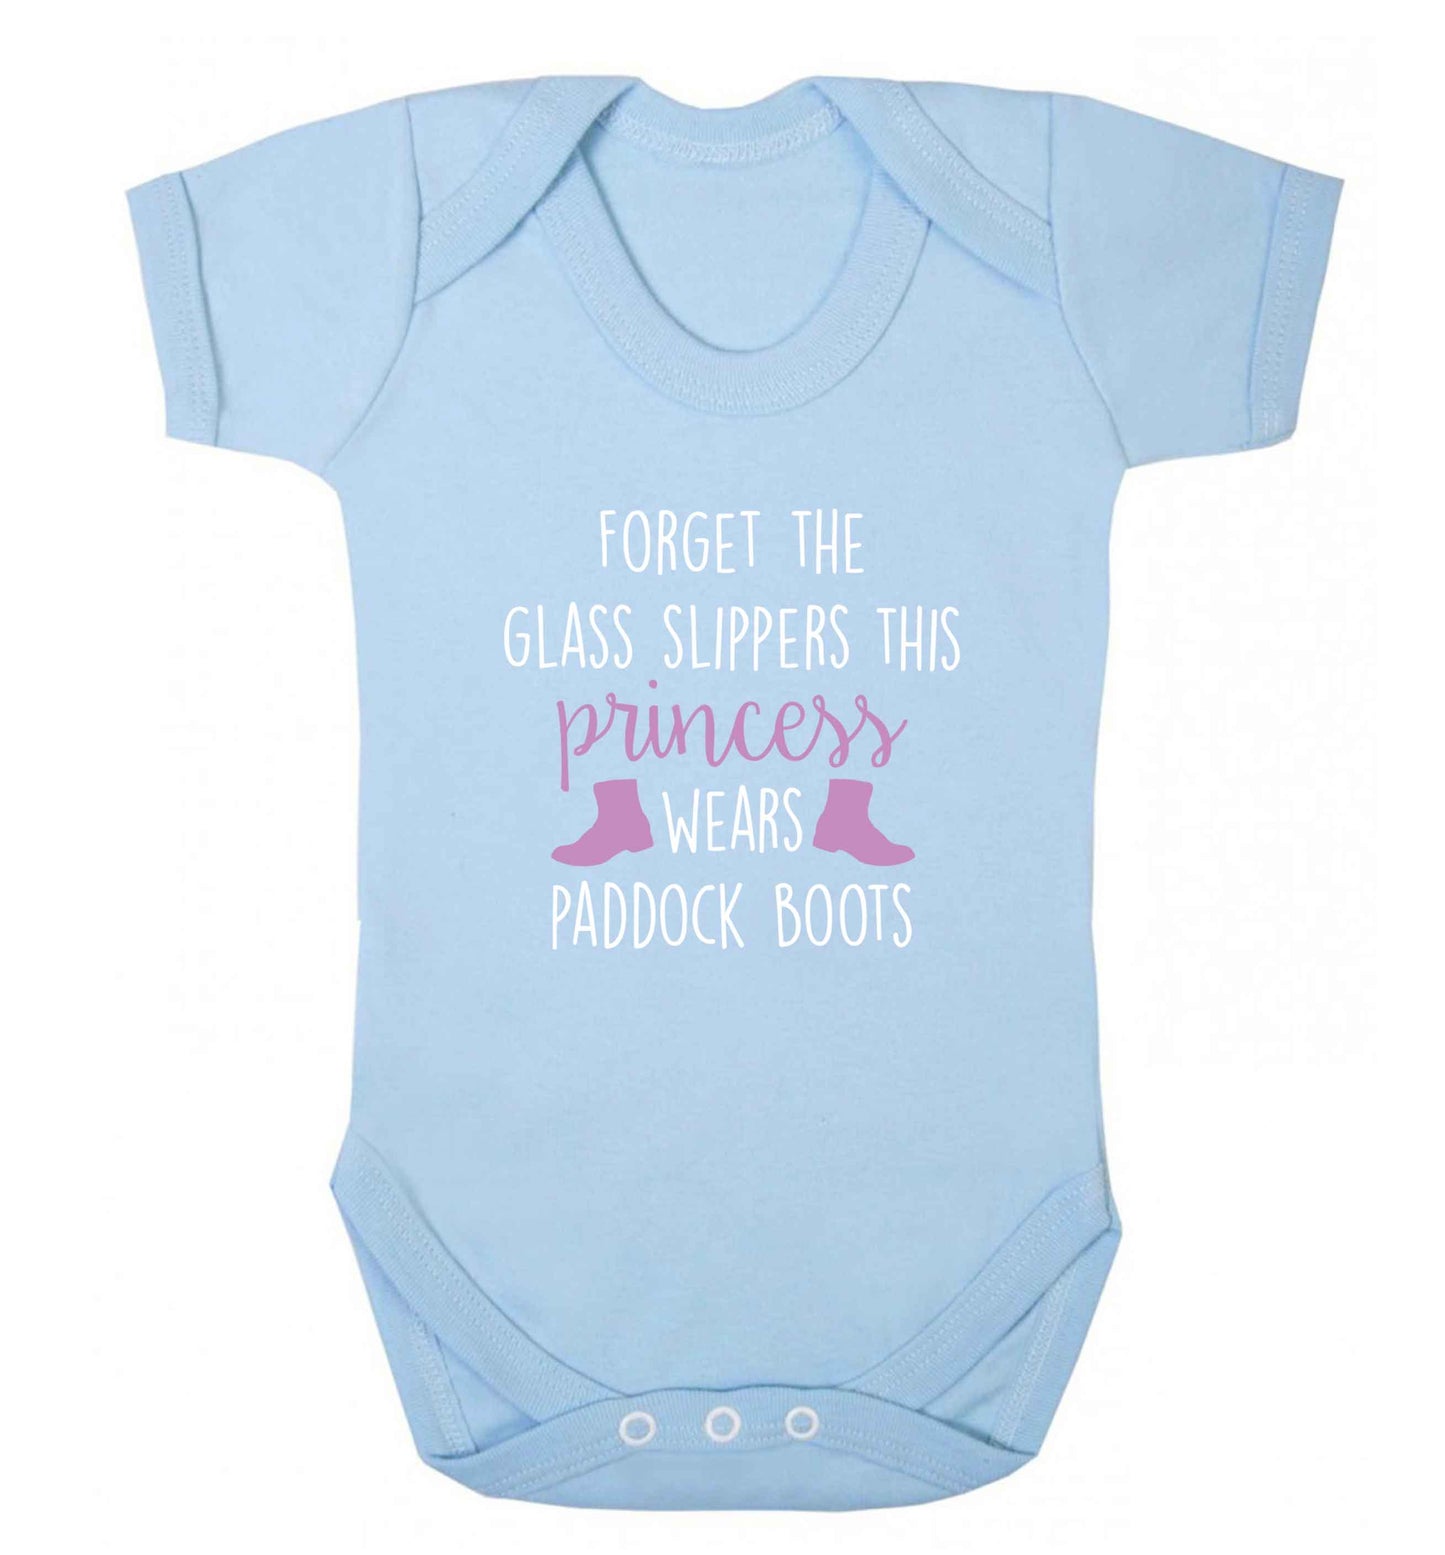 Forget the glass slippers this princess wears paddock boots baby vest pale blue 18-24 months